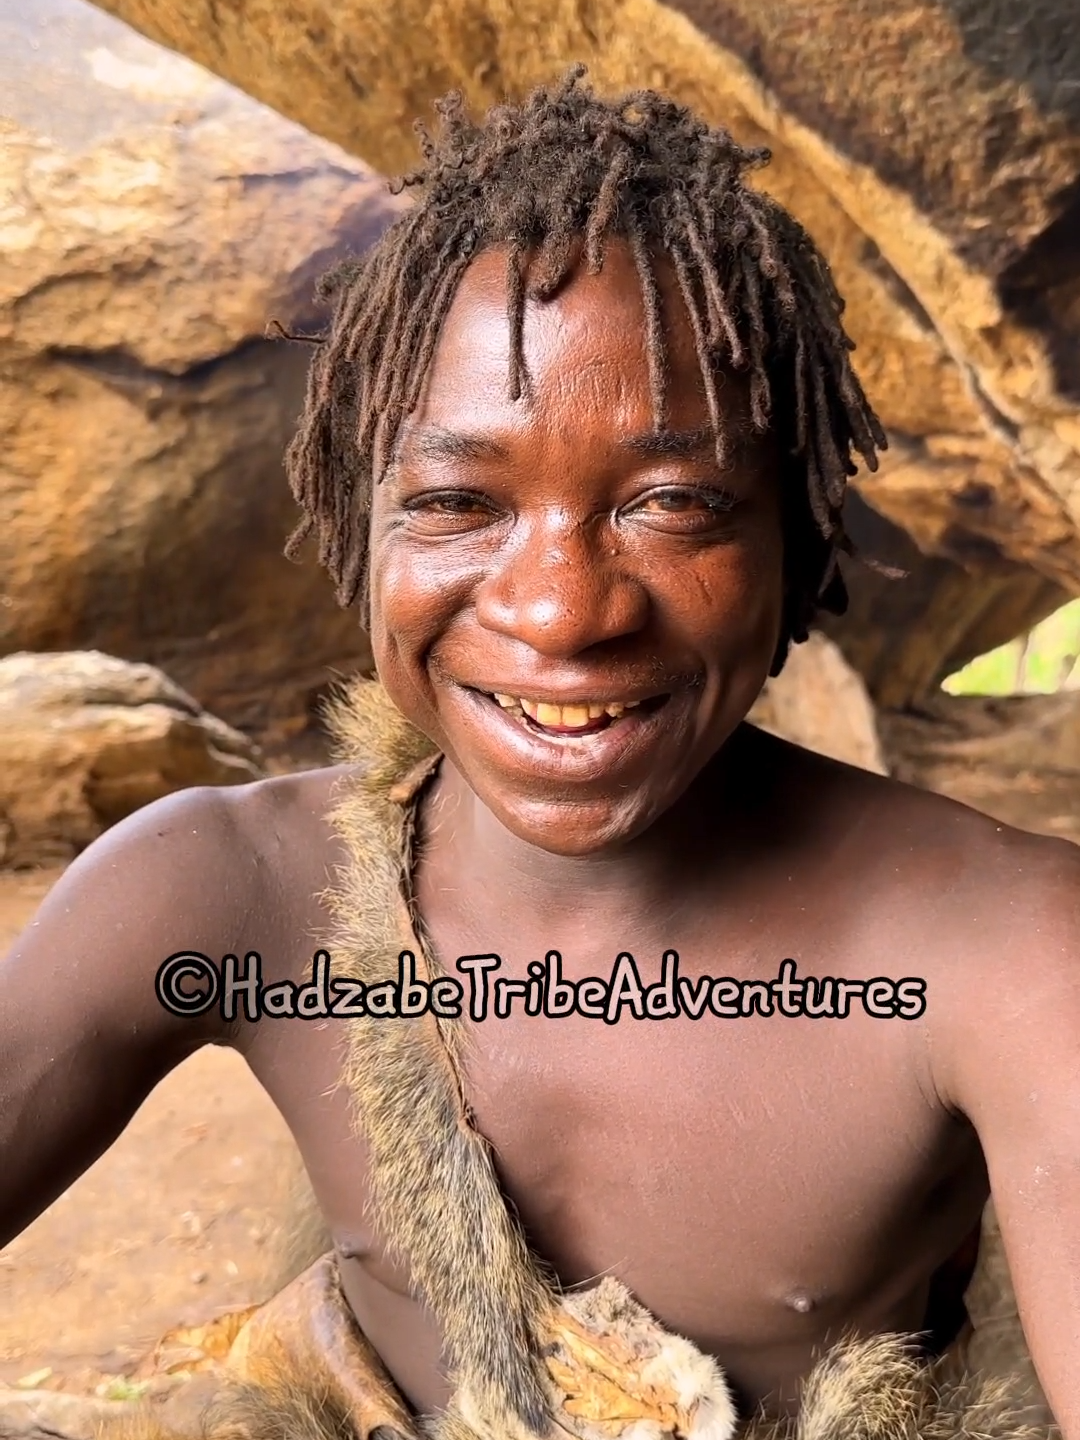 Meet Hadzabe Tribe, they have the most unique names in the world because they consist of different clicking sounds #hadzabetribe #hadzabe #africantribes #bushlife